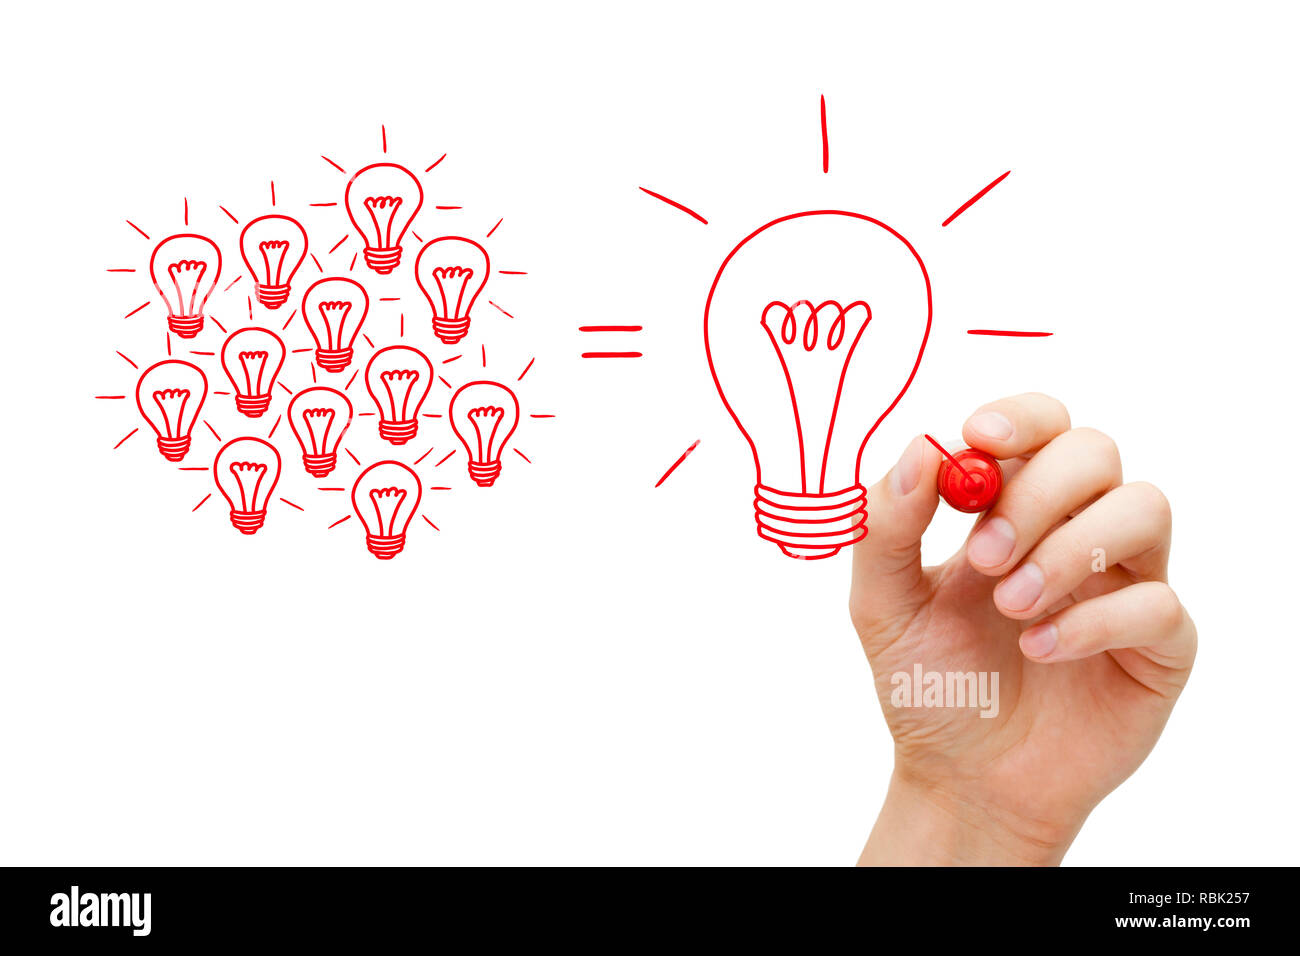 Hand drawing with red marker light bulbs concept illustrating how a business team is working together developing a great idea. Stock Photo